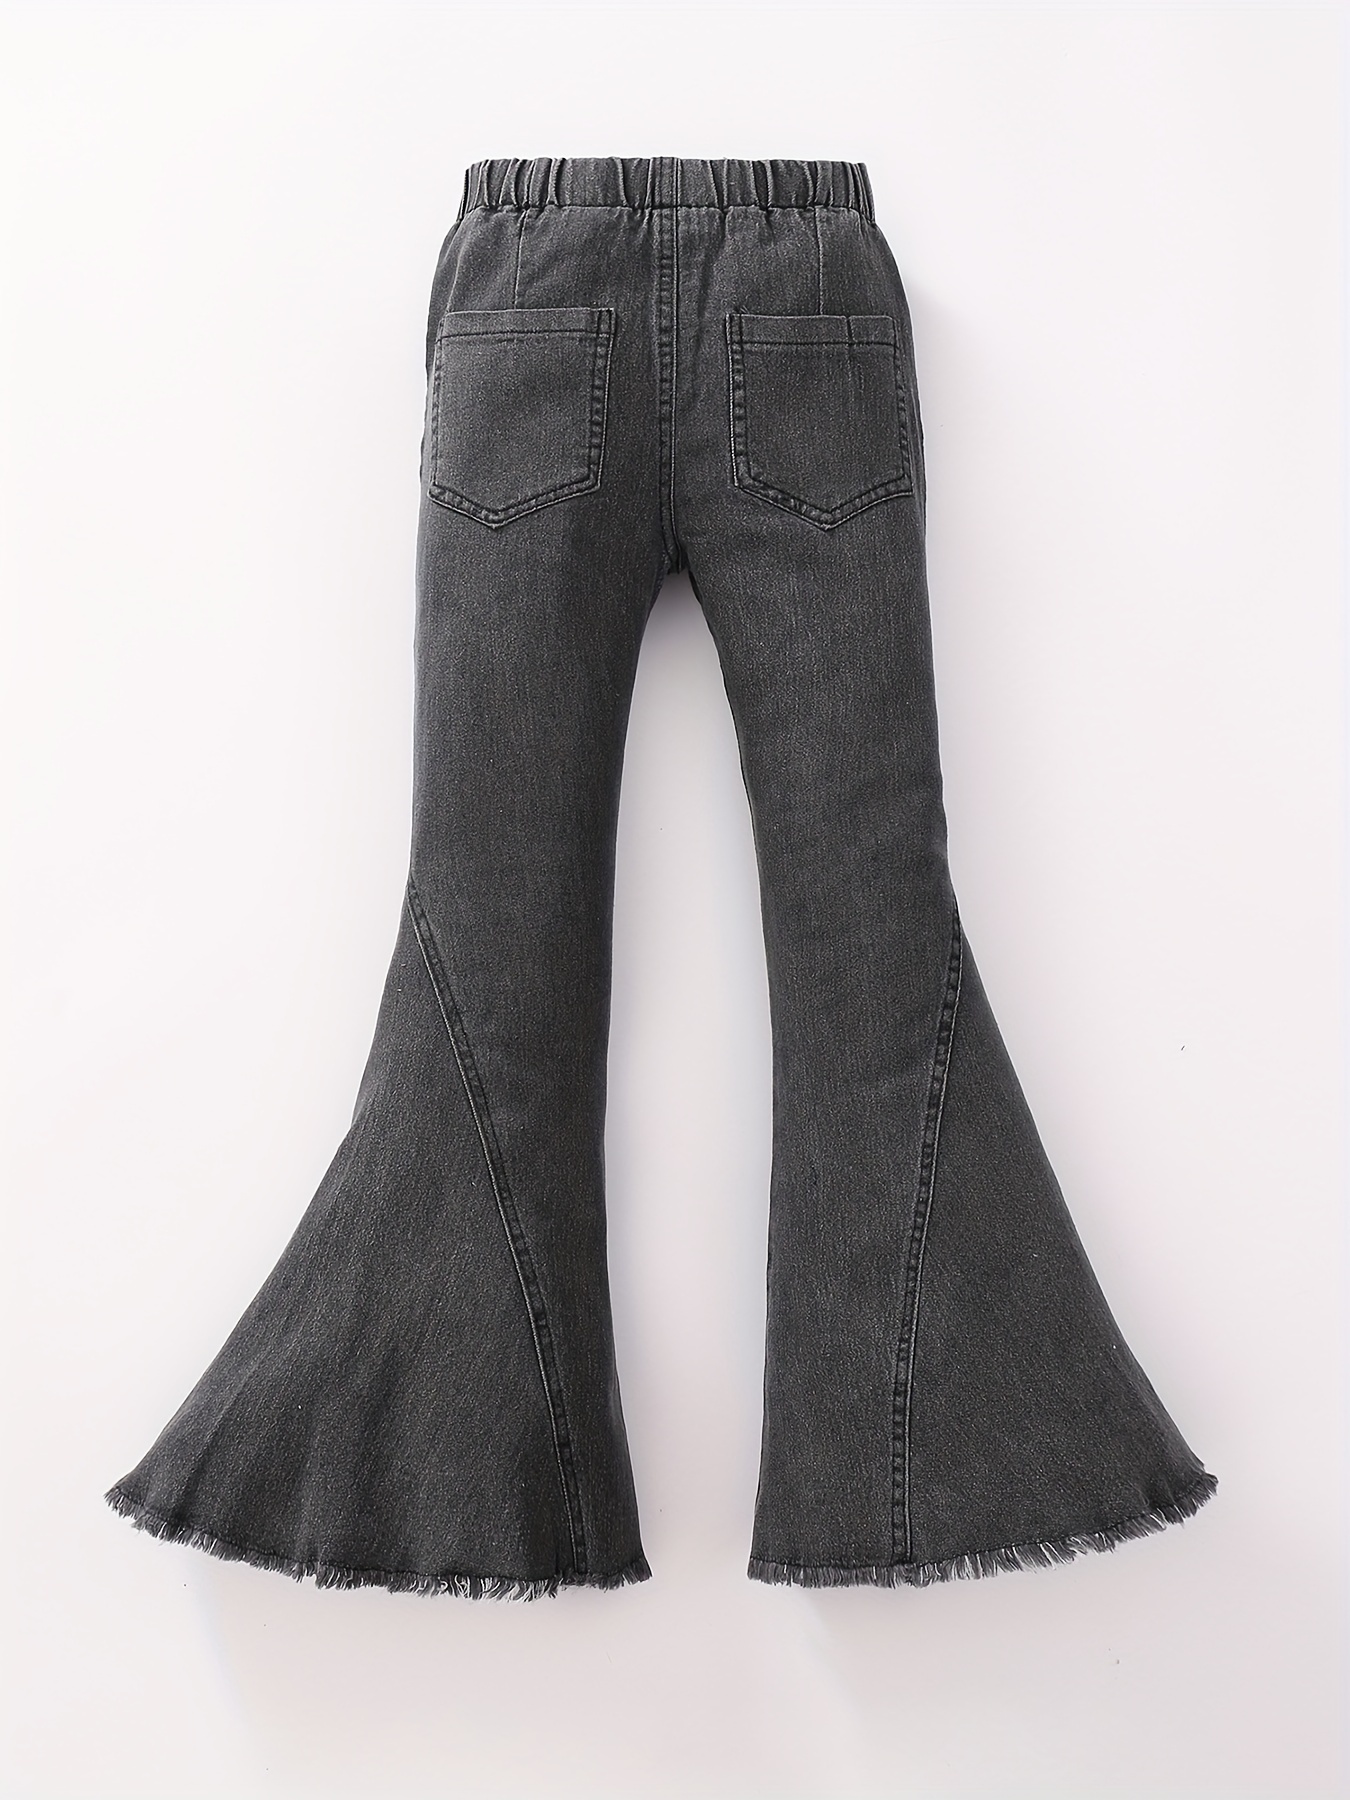 Bell Bottoms are classic.  Denim fashion, Chic outfits, Casual